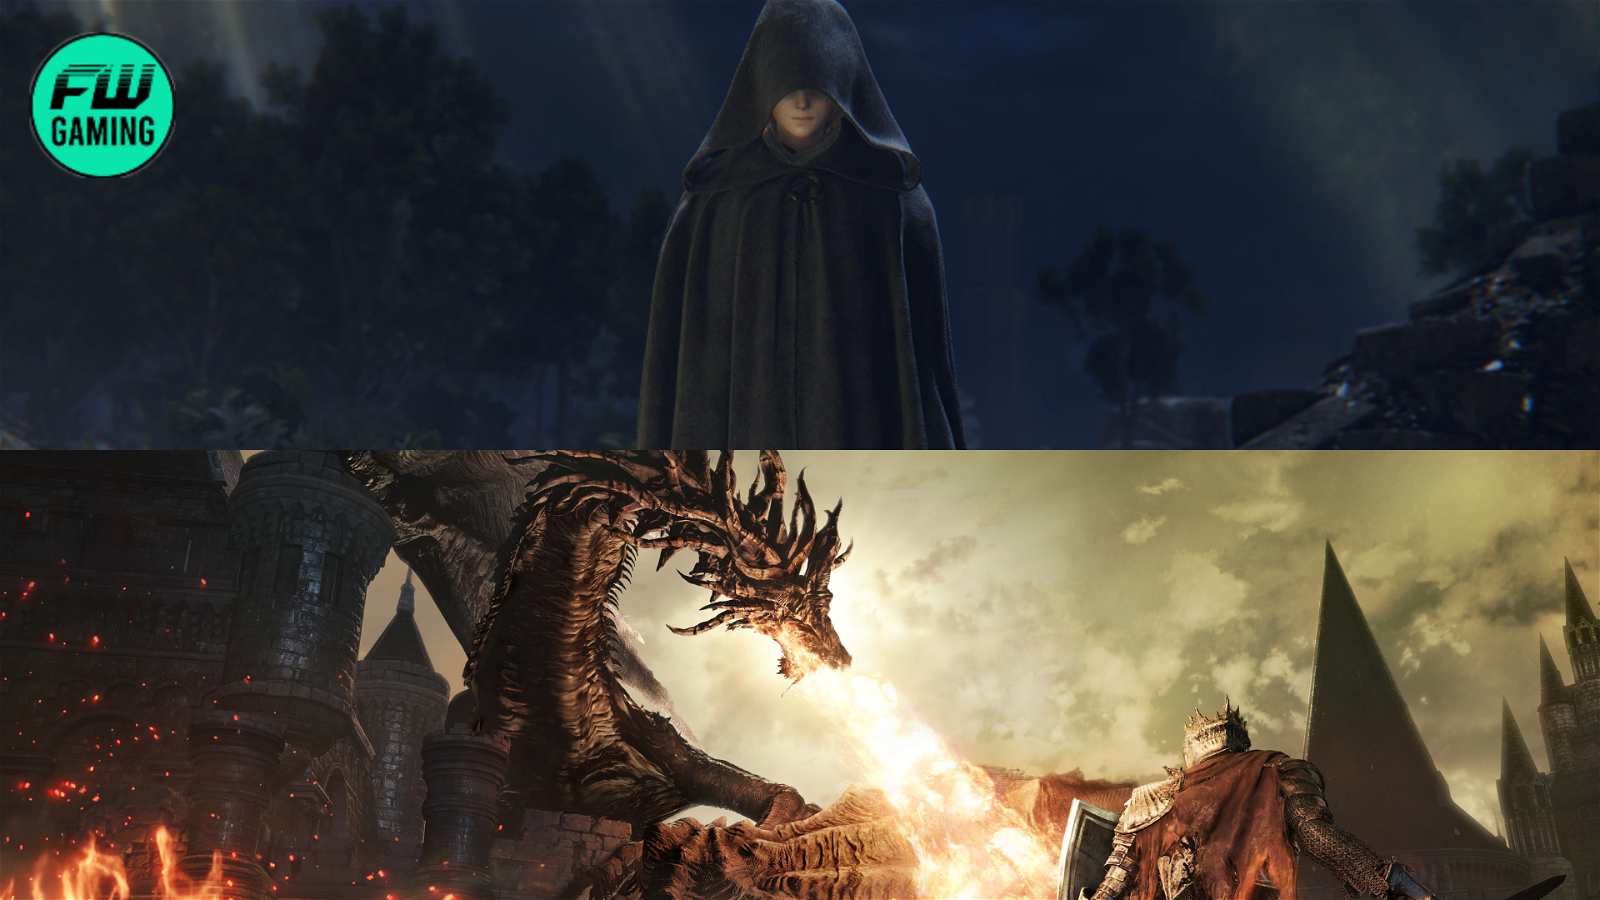 One Incredible Theory May Prove Elden Ring & Dark Souls 3 Share More Than Just a Genre